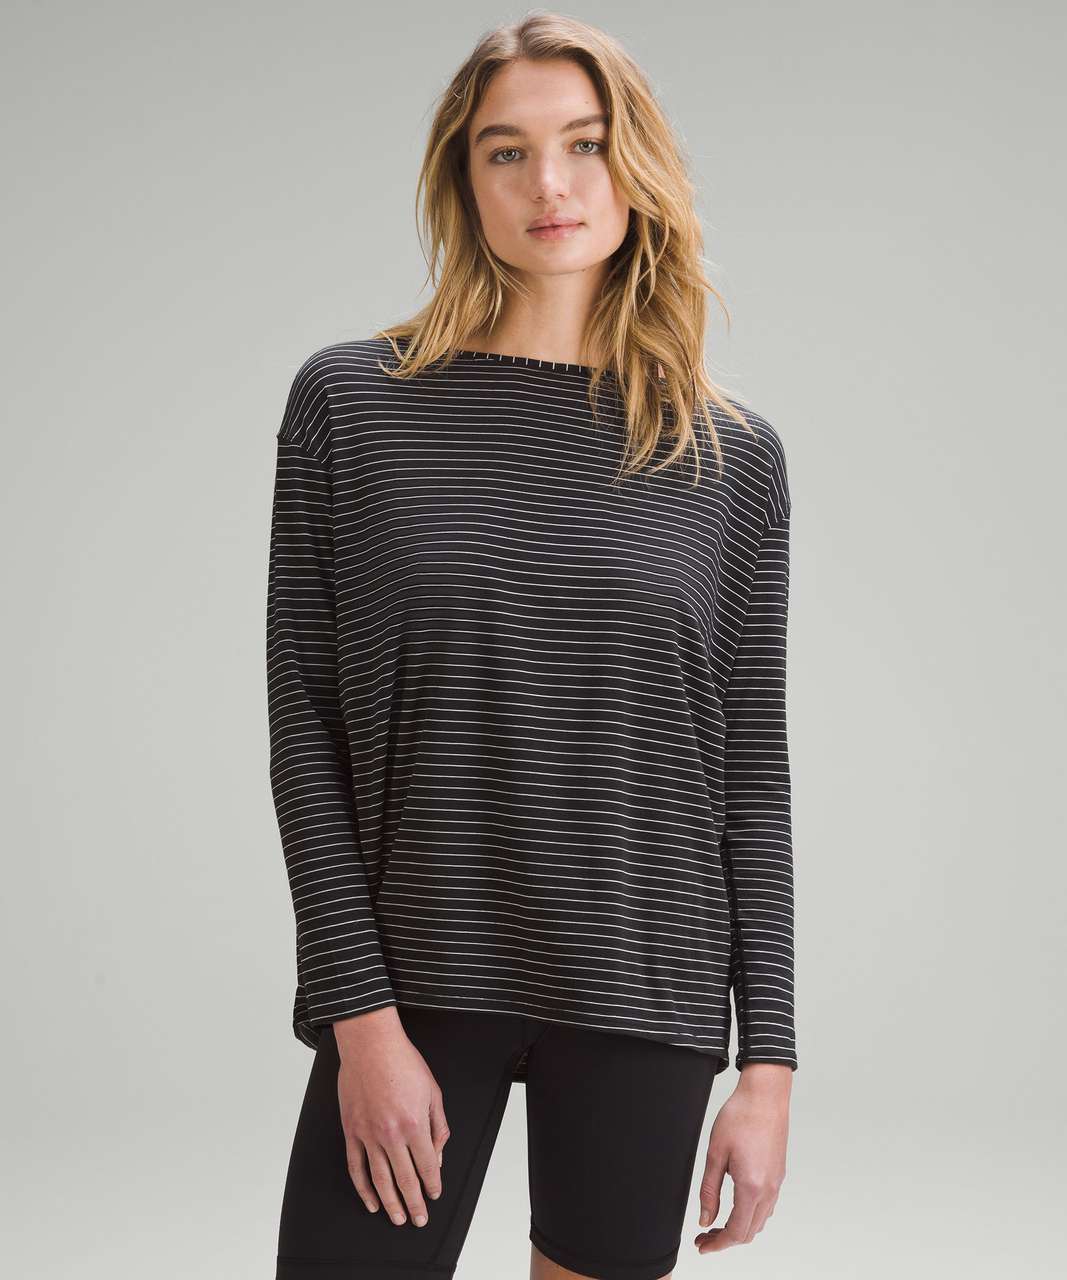 NEW Women Lululemon Back in Action Long Sleeve Heathered Spiced